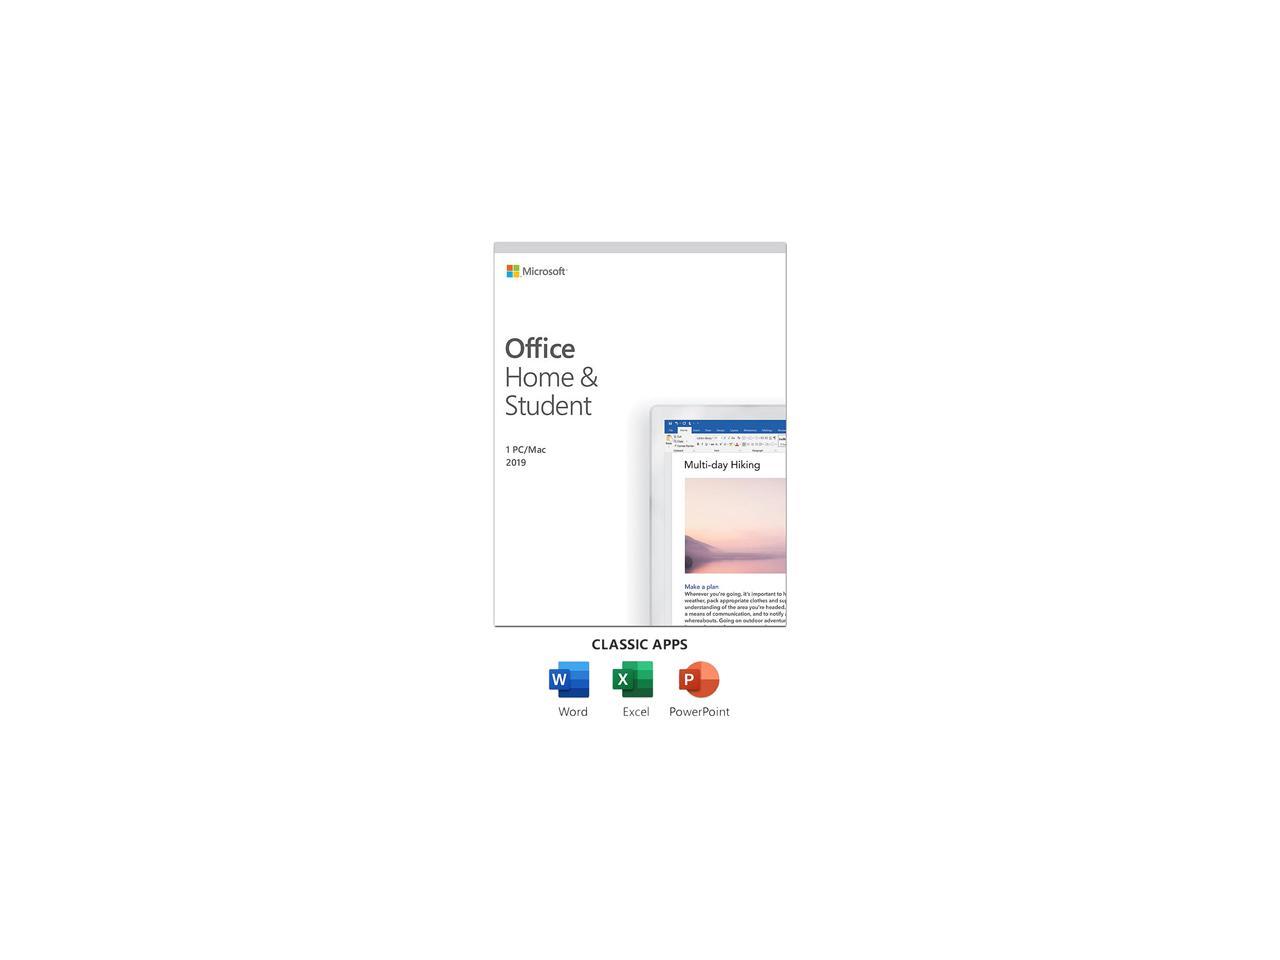 buy microsoft office home and student 2019 for mac